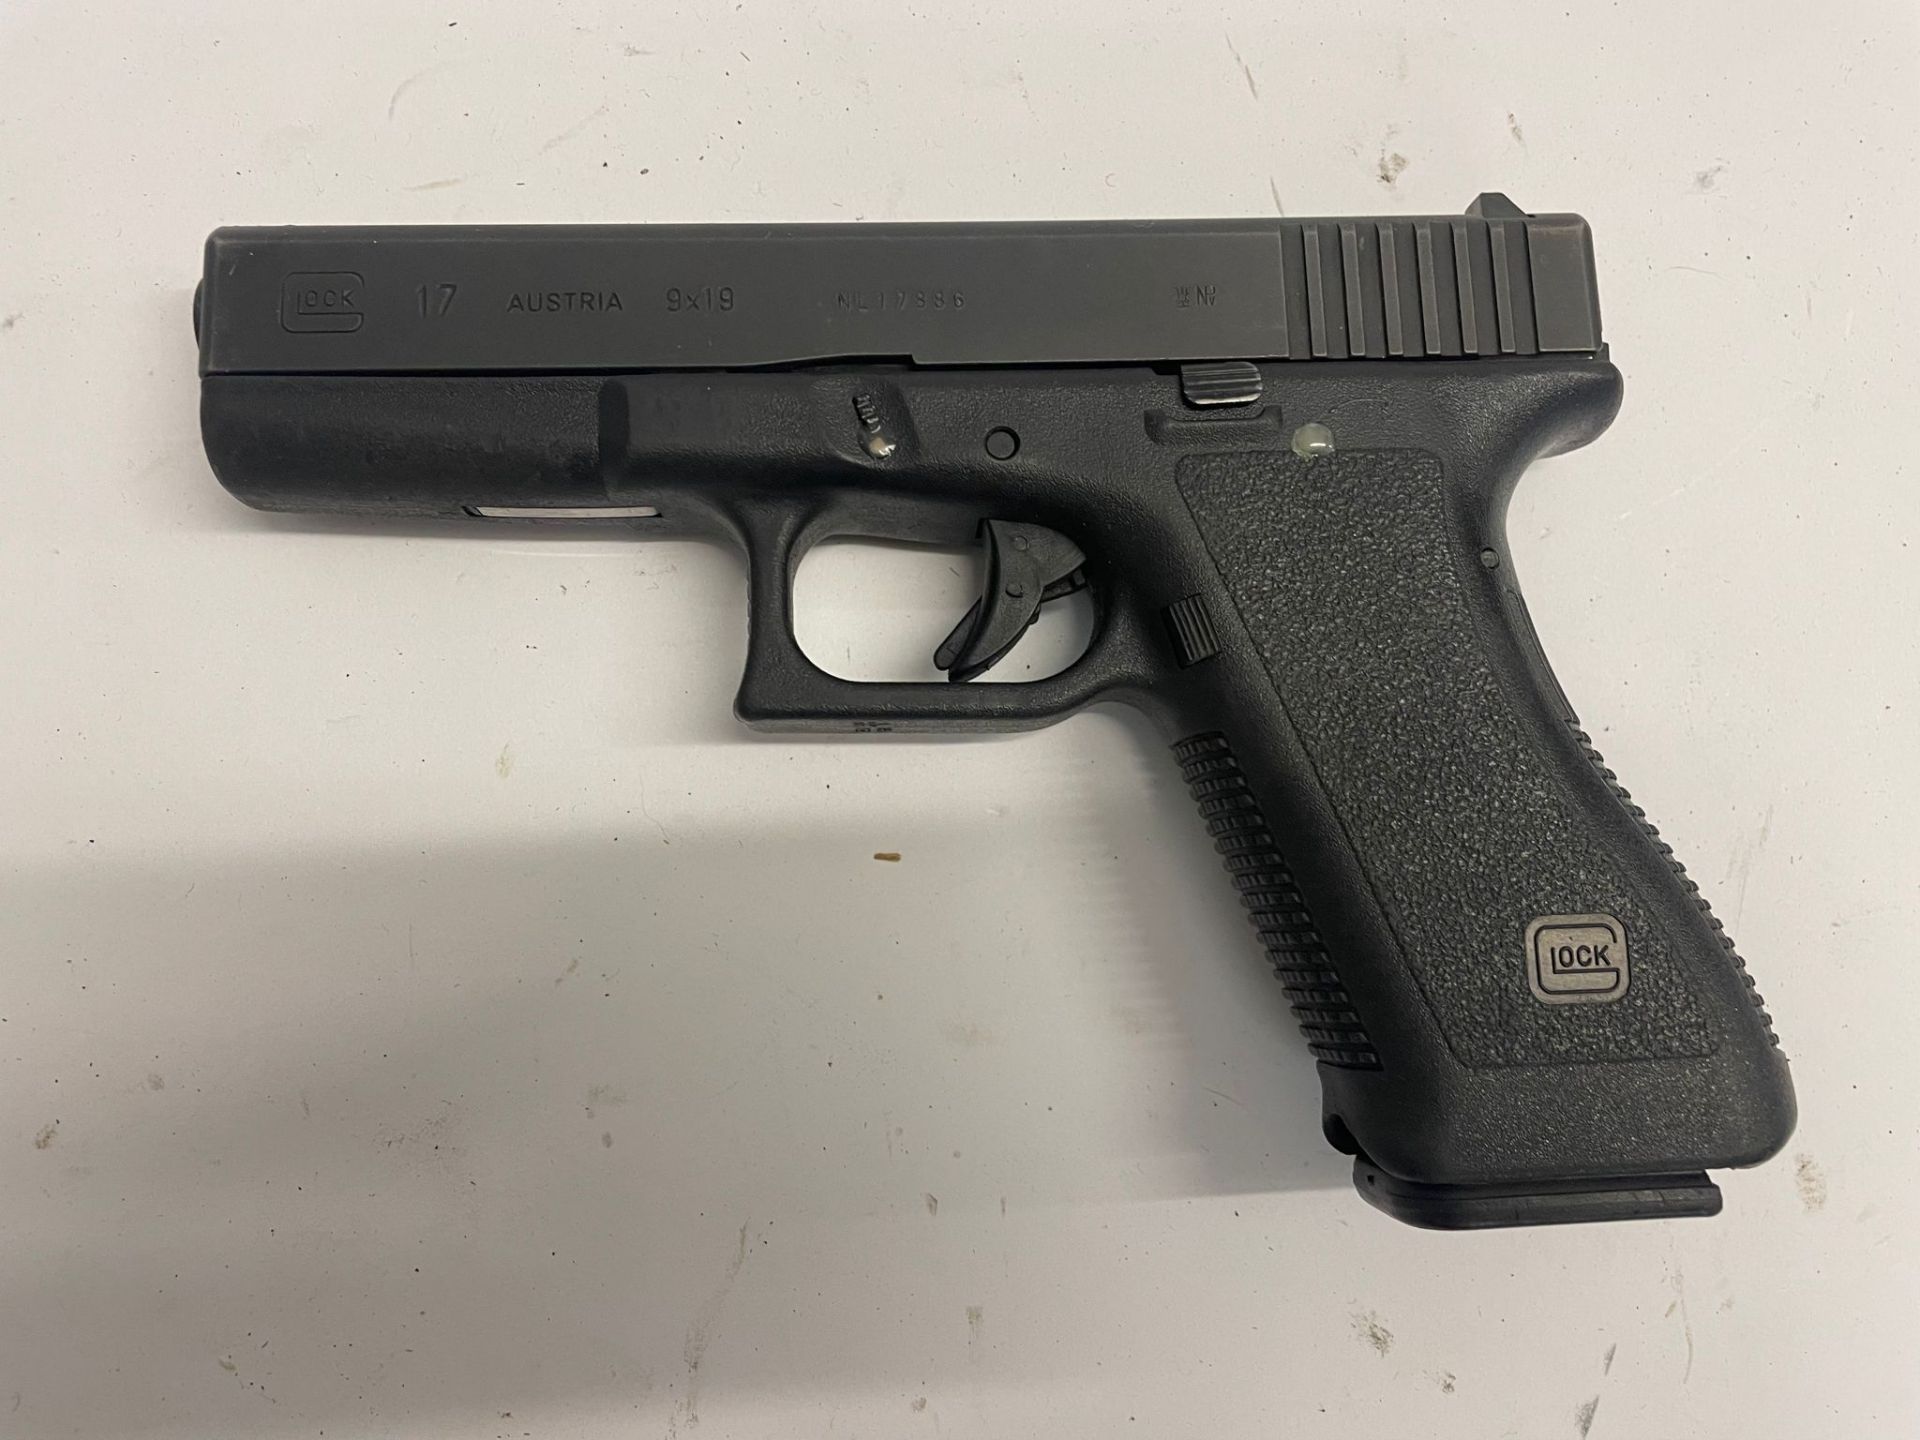 A deactivated (EU Cert) Glock 17 semi automatic pistol. This lot will be available to collect in